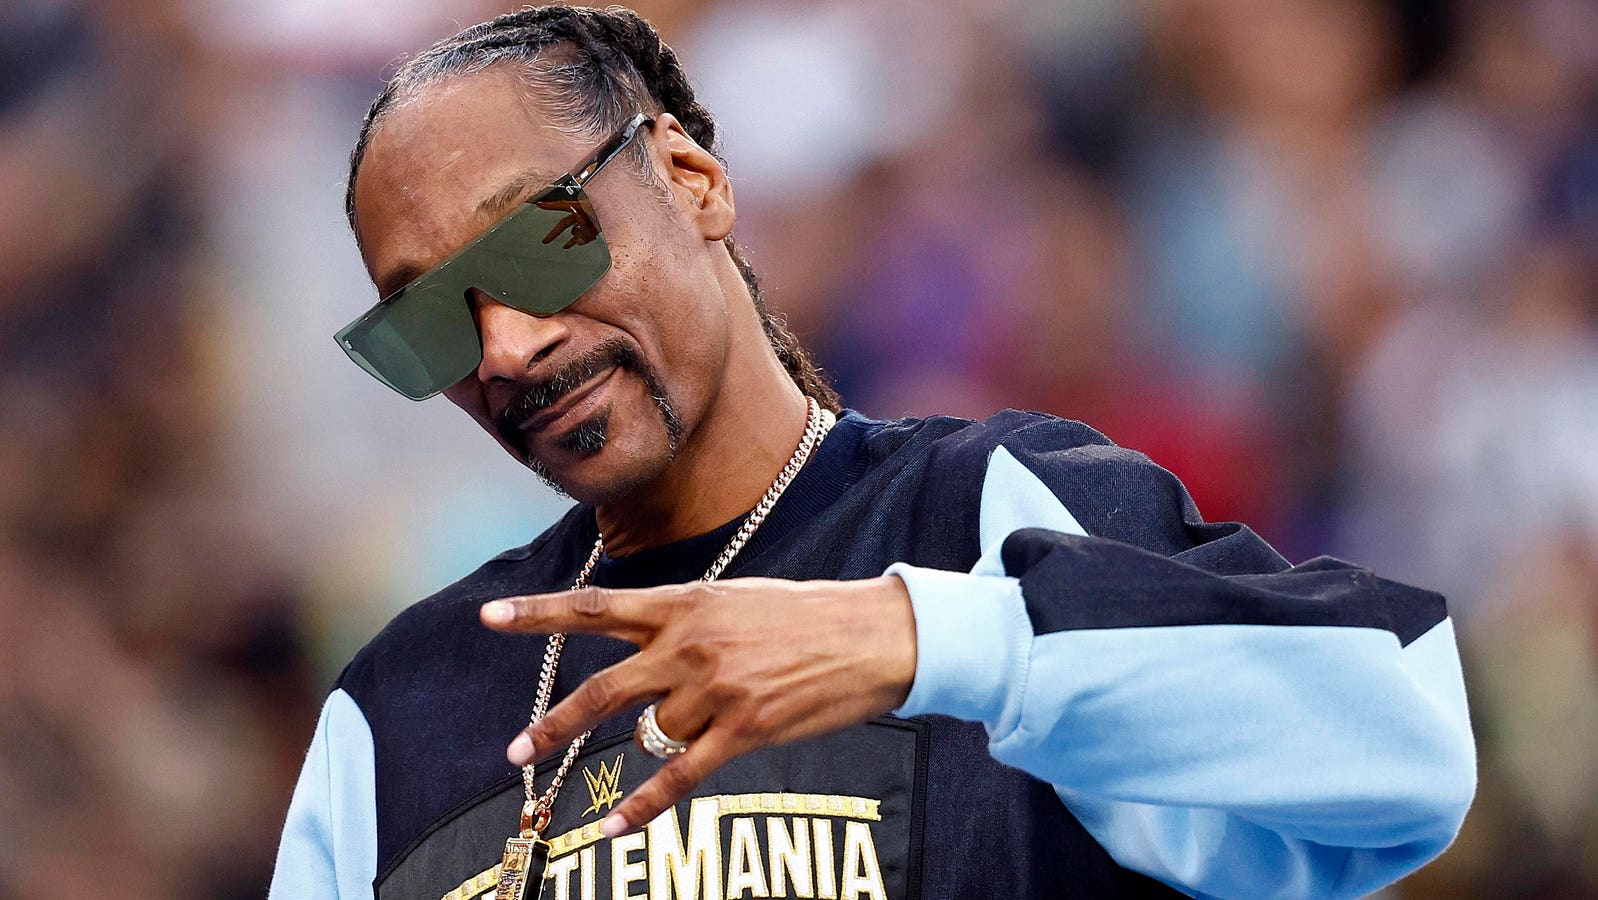 Snoop Dogg’s Shift To ‘Give Up Smoke’ And The Classes For Leaders